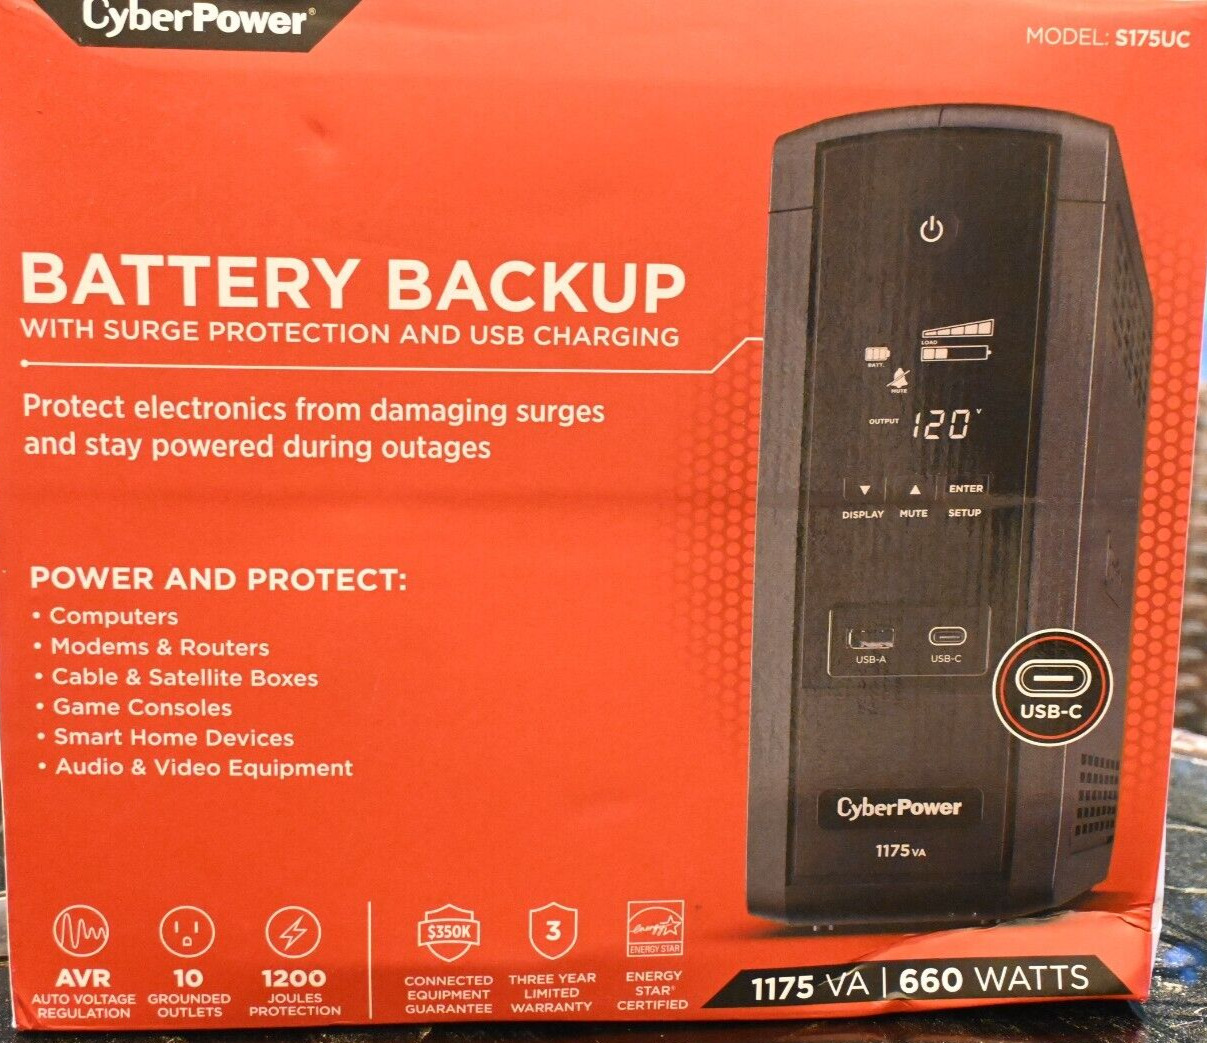 New CyberPower UPS S175UC 1175VA Battery Backup with Surge Protection